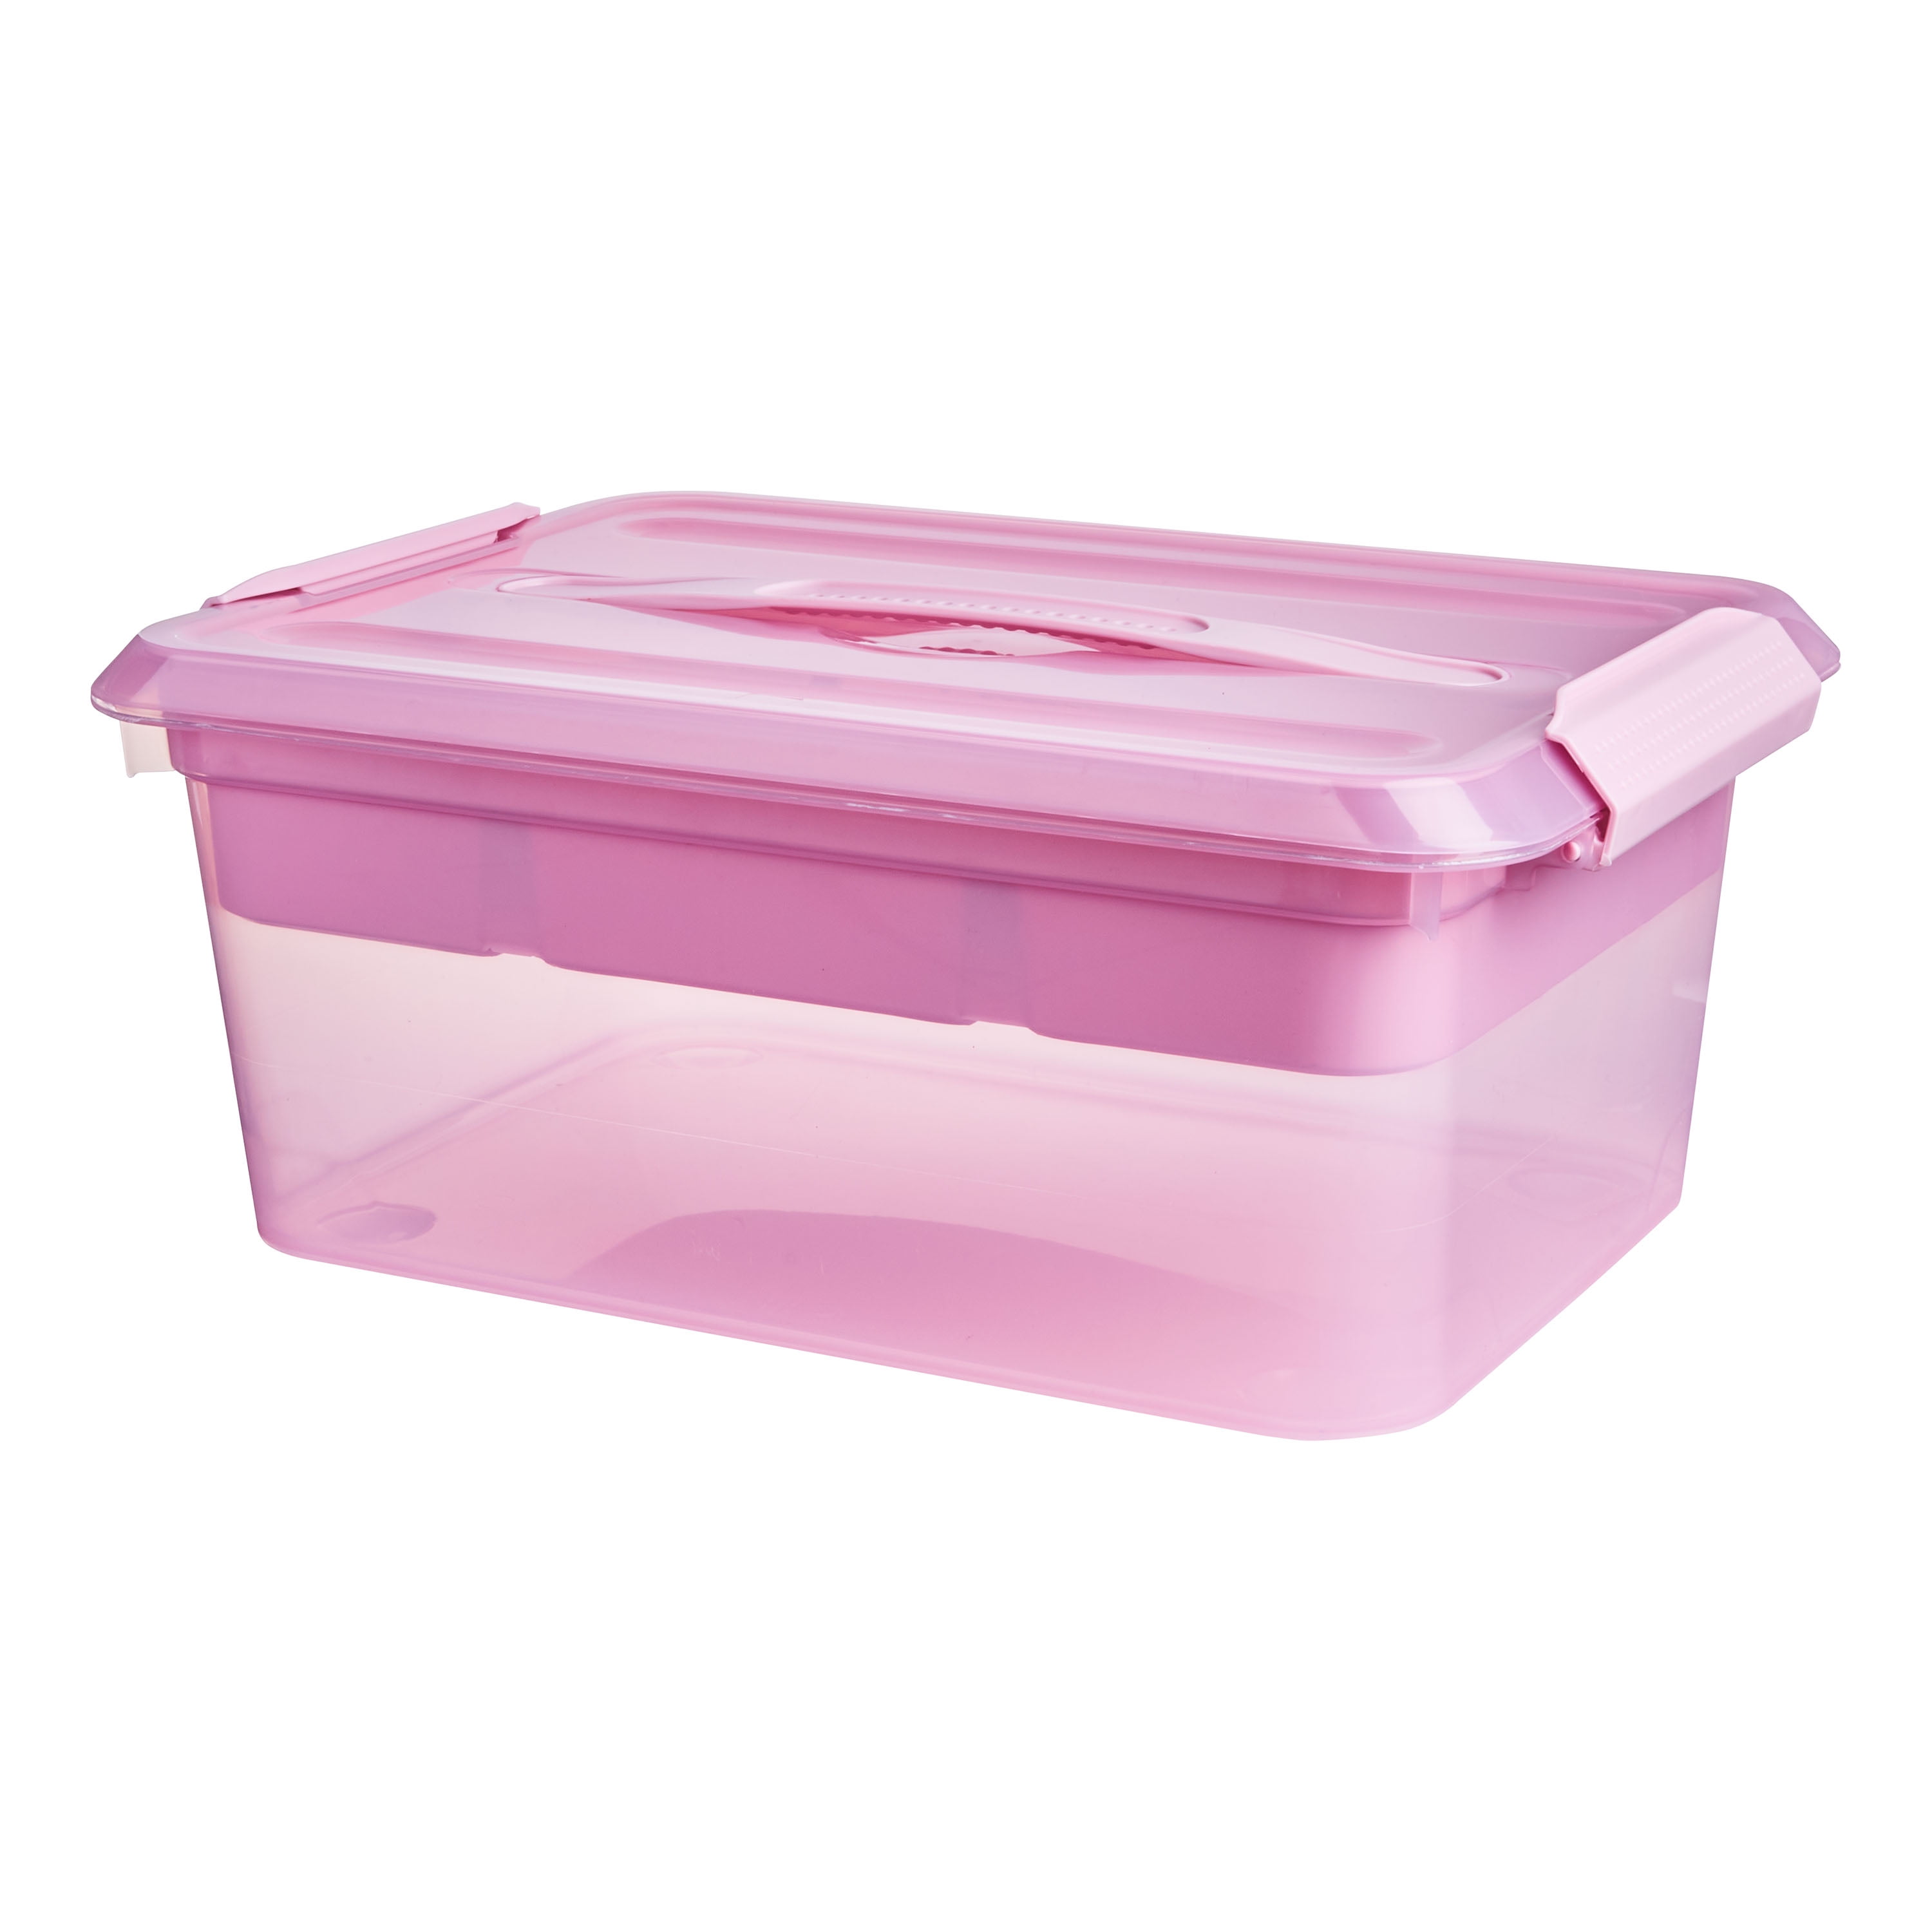 PINK PLASTIC LARGE 52L LITRE STORAGE BOX TUB CONTAINER WITH CLEAR LID TOY/KIDS 